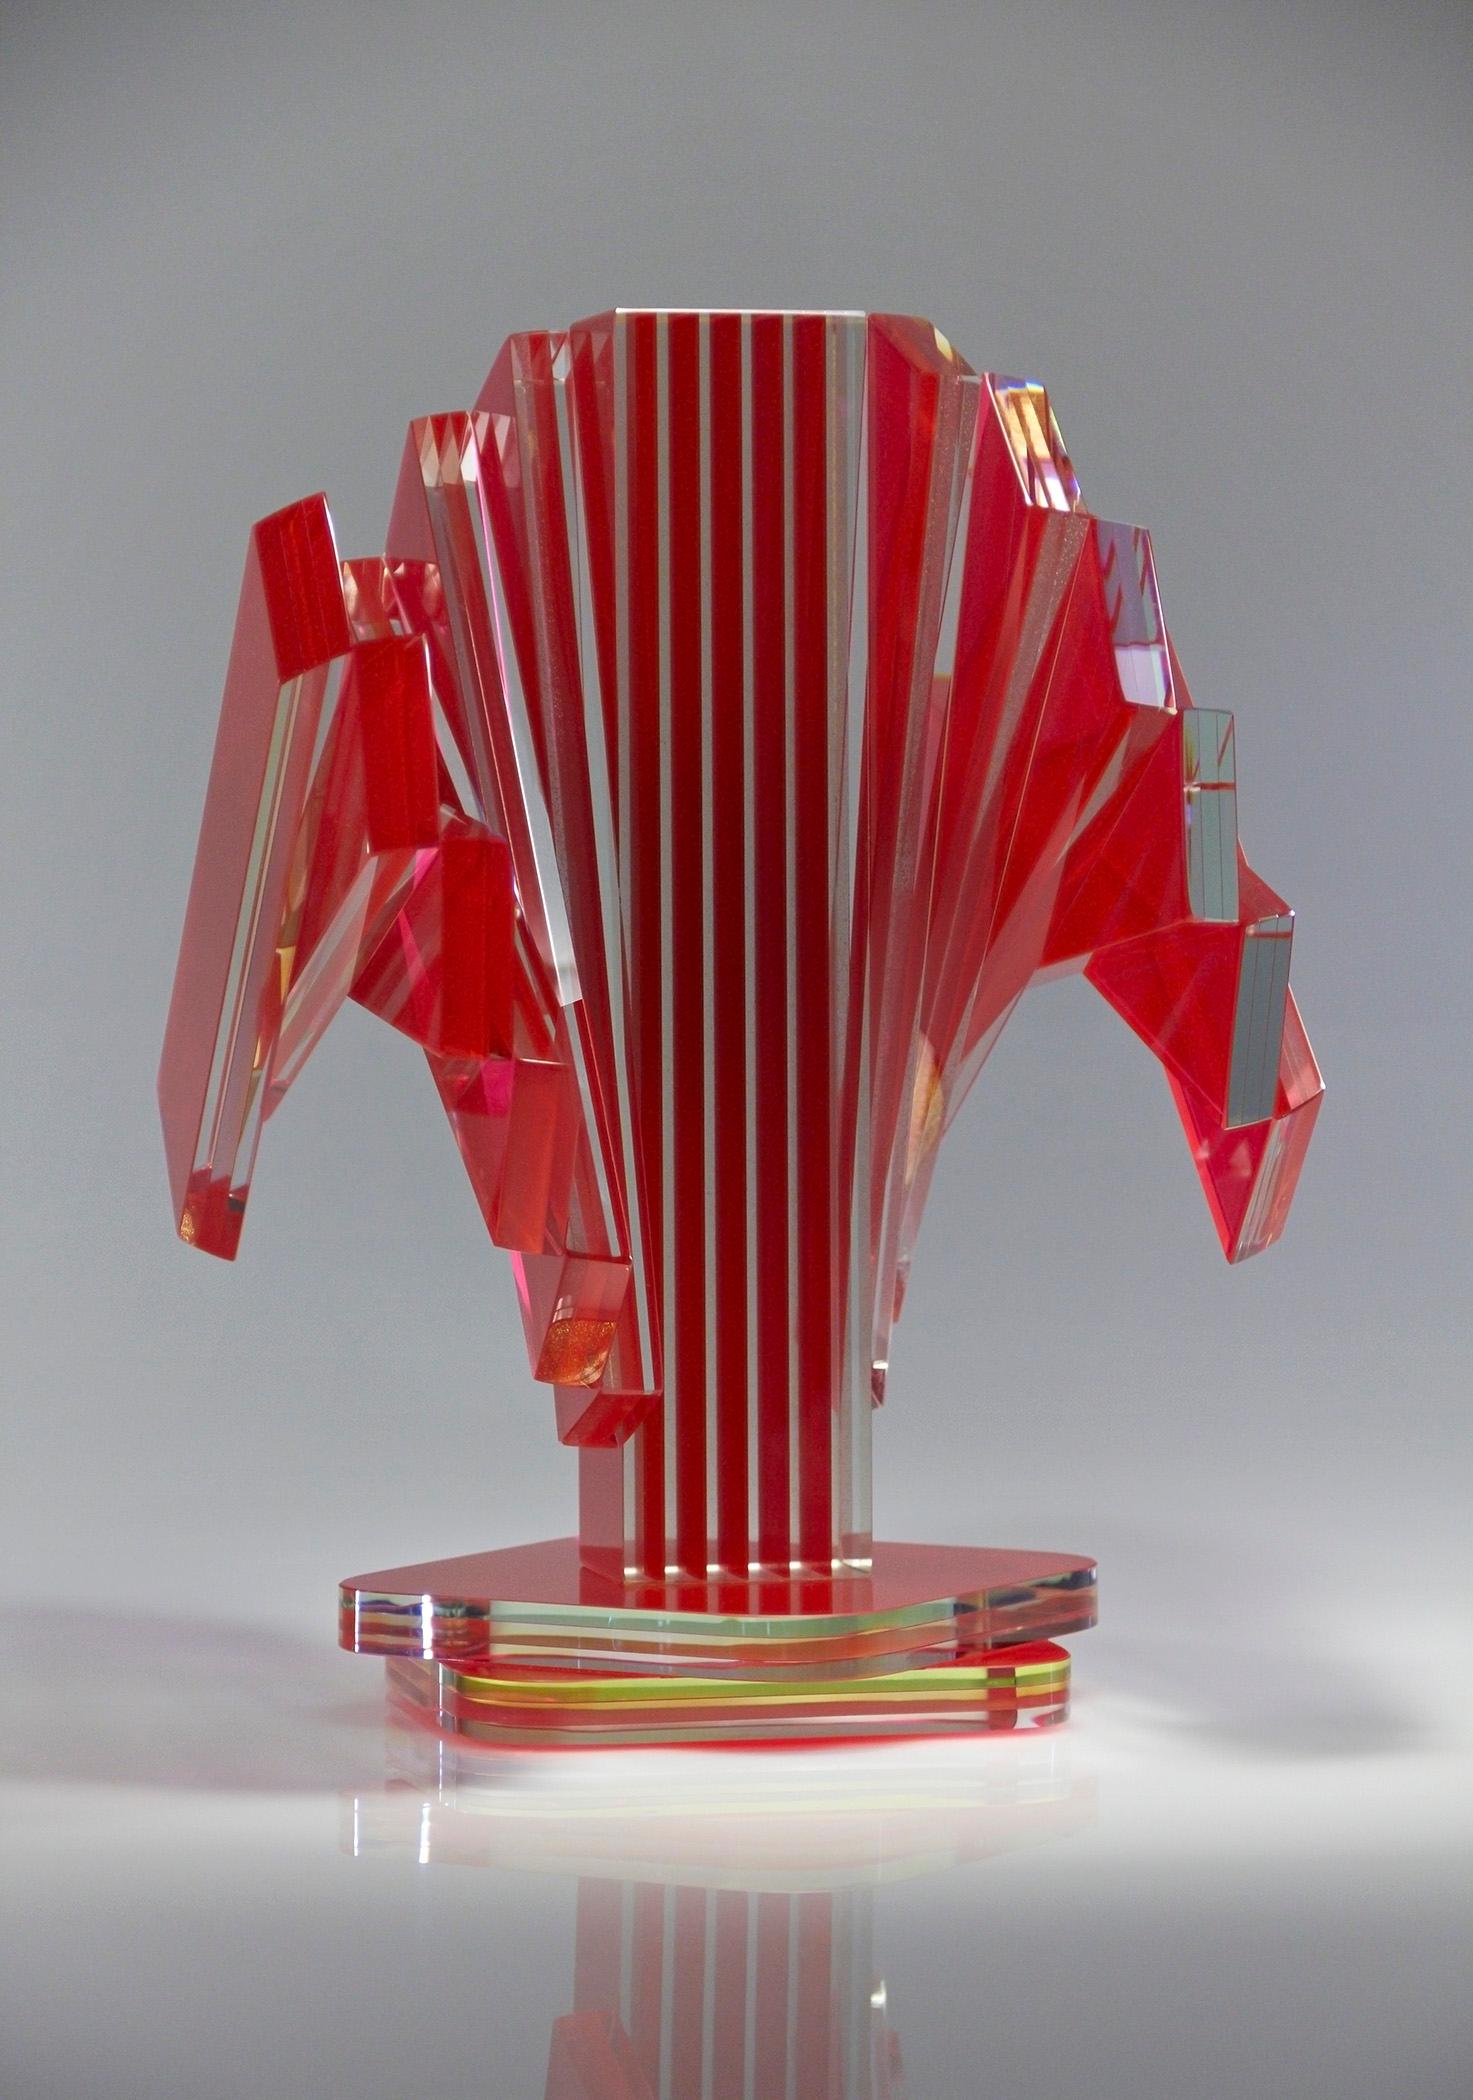 Hand-Crafted Red and Gold Plate Glass Contemporary Tabletop Sculpture For Sale